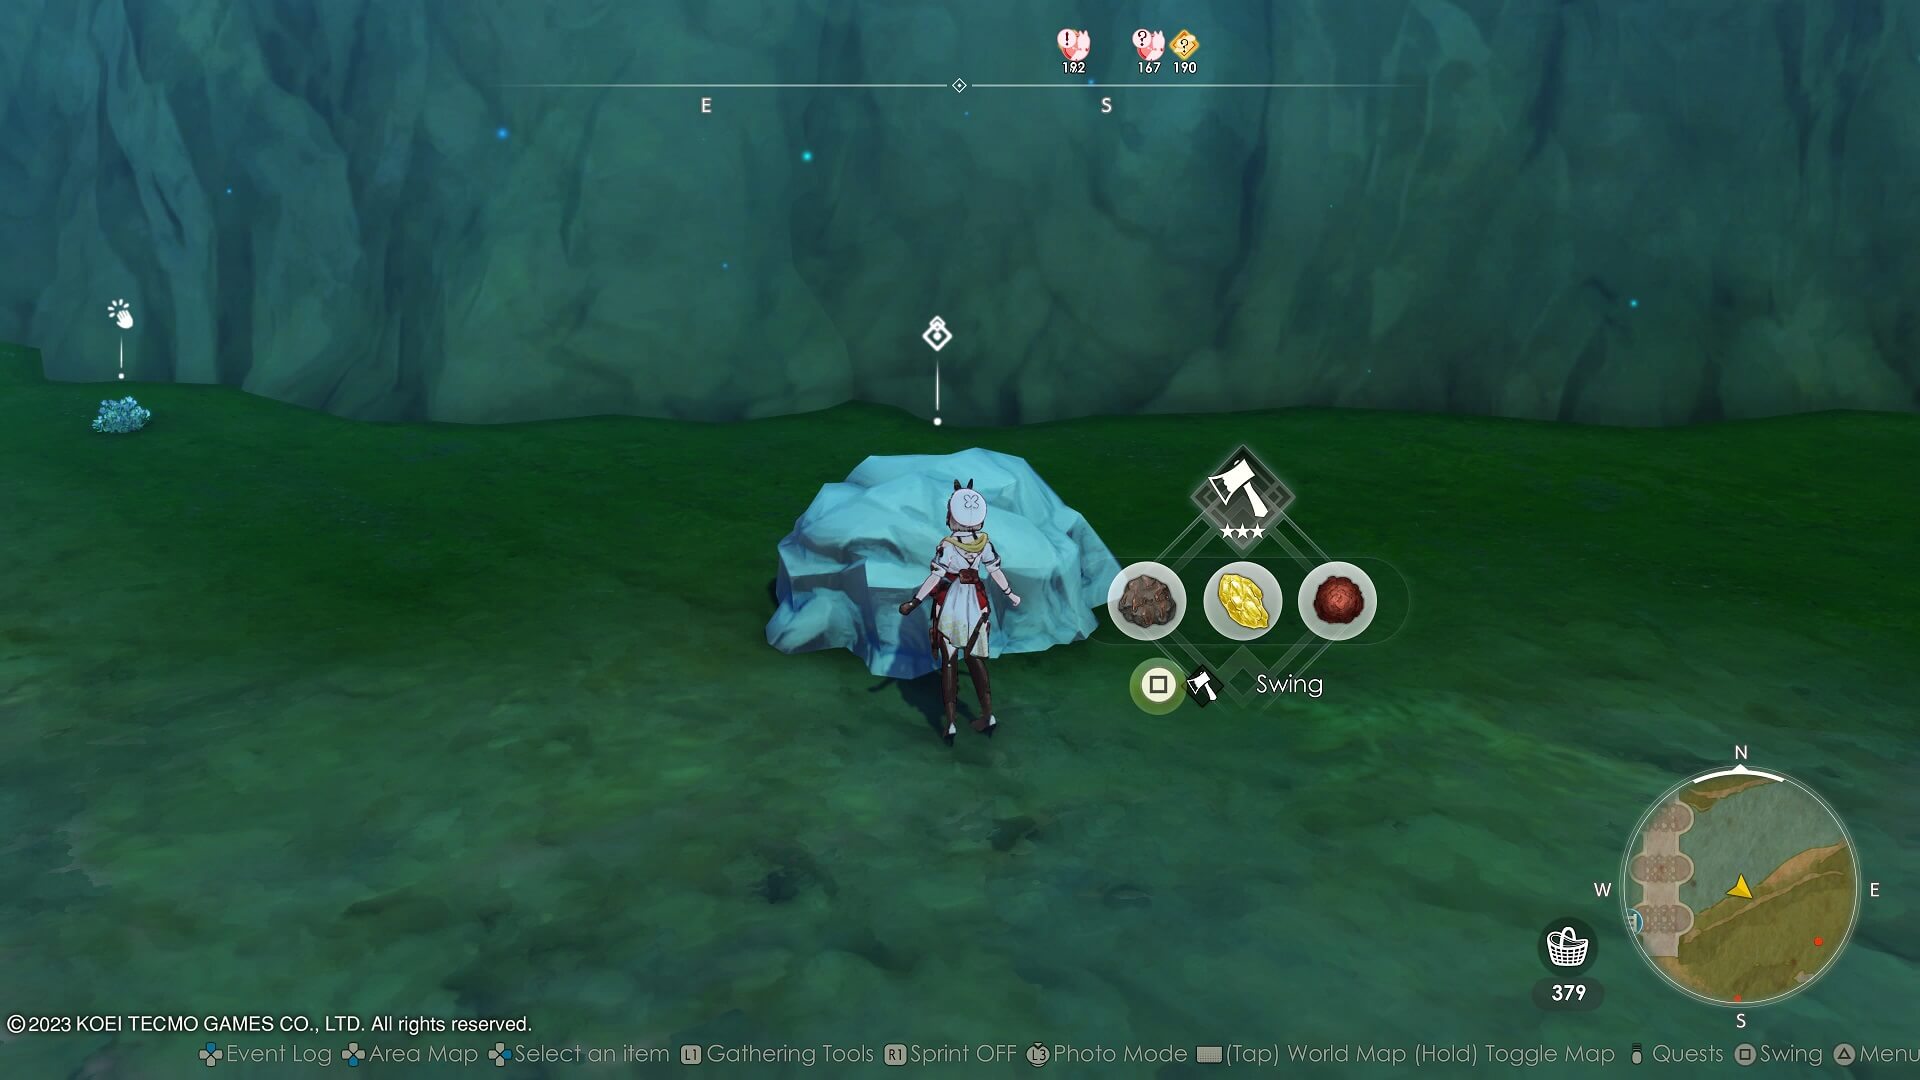 Preparing to destroy a rock using an ax in Atelier Ryza 3.